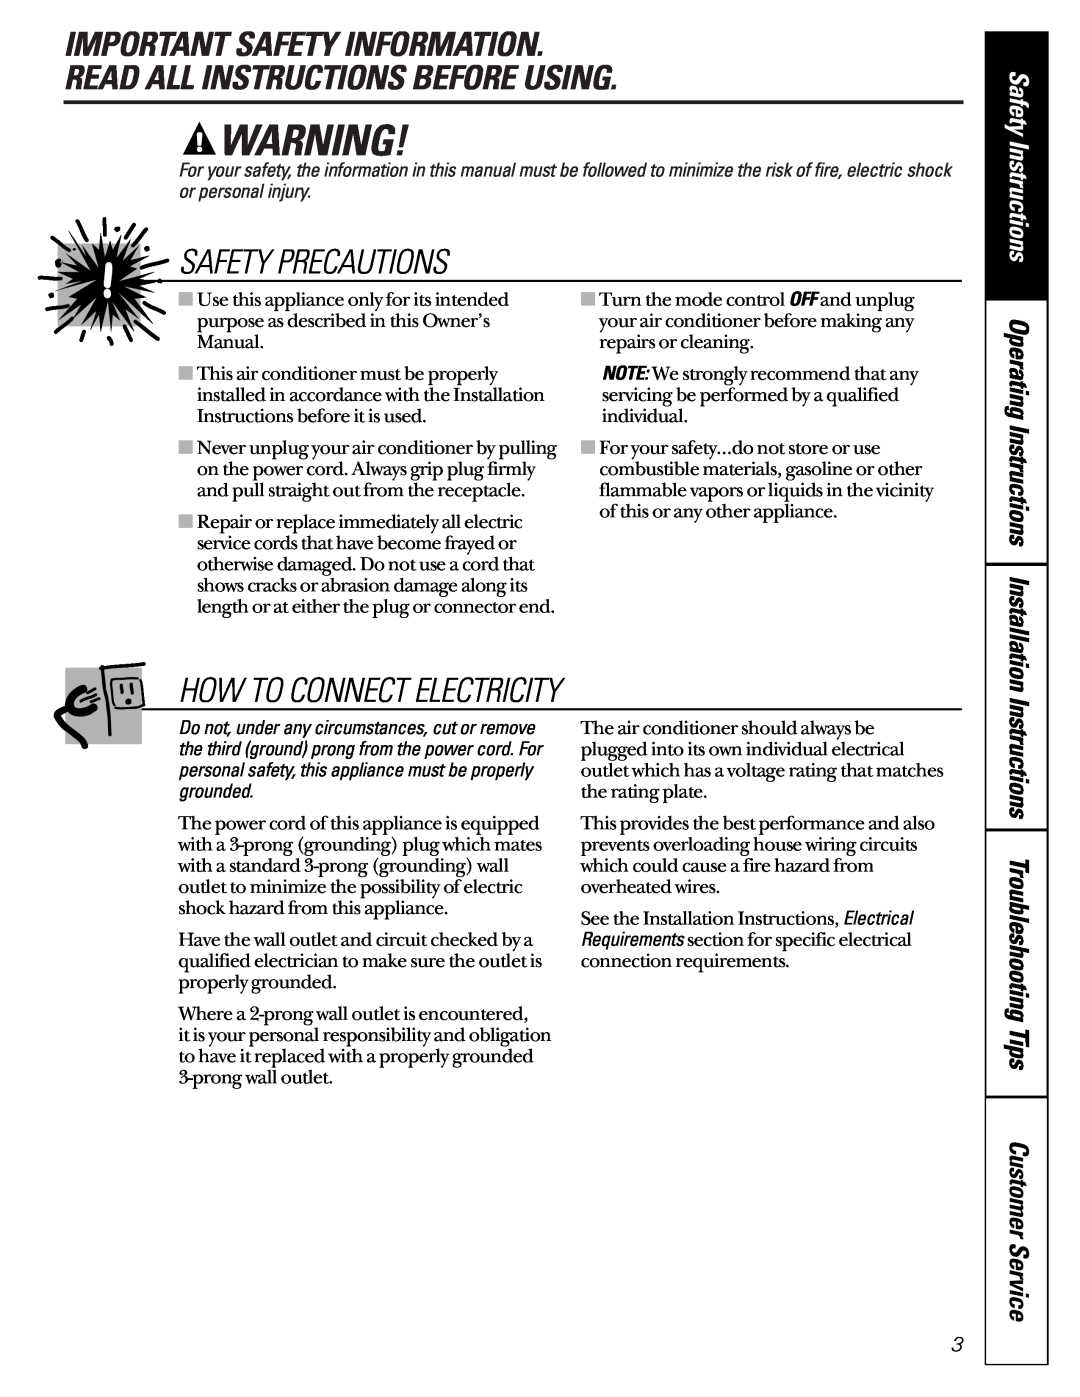 GE AS_18 Important Safety Information, Read All Instructions Before Using, Safety Precautions, How To Connect Electricity 